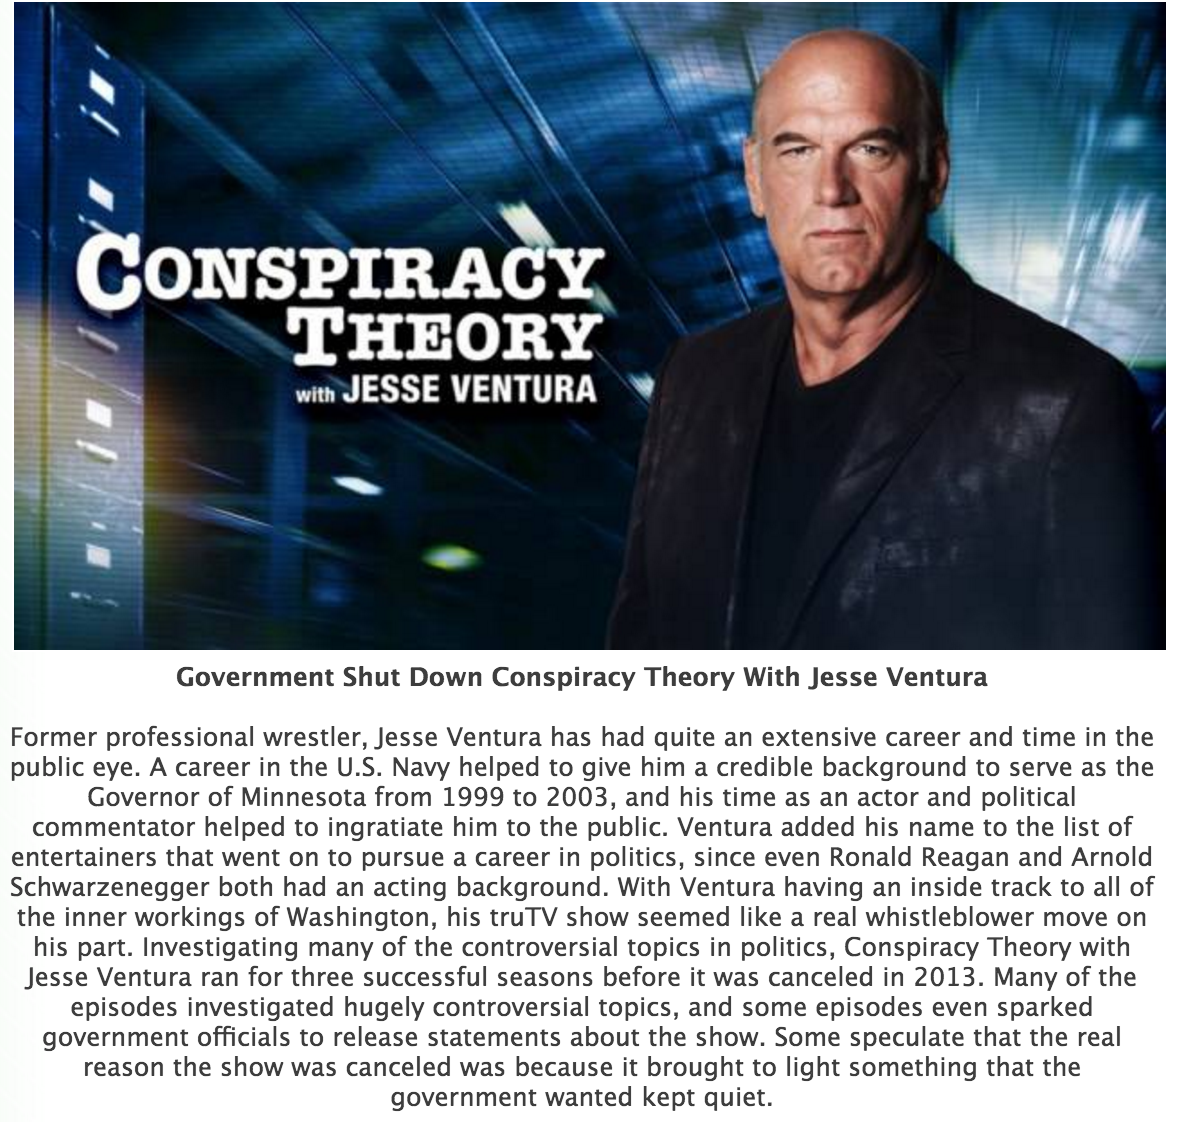 jesse ventura conspiracy theory - Conspiracy Theory with Jesse Ventura Government Shut Down Conspiracy Theory With Jesse Ventura Former professional wrestler, Jesse Ventura has had quite an extensive career and time in the public eye. A career in the U.S.